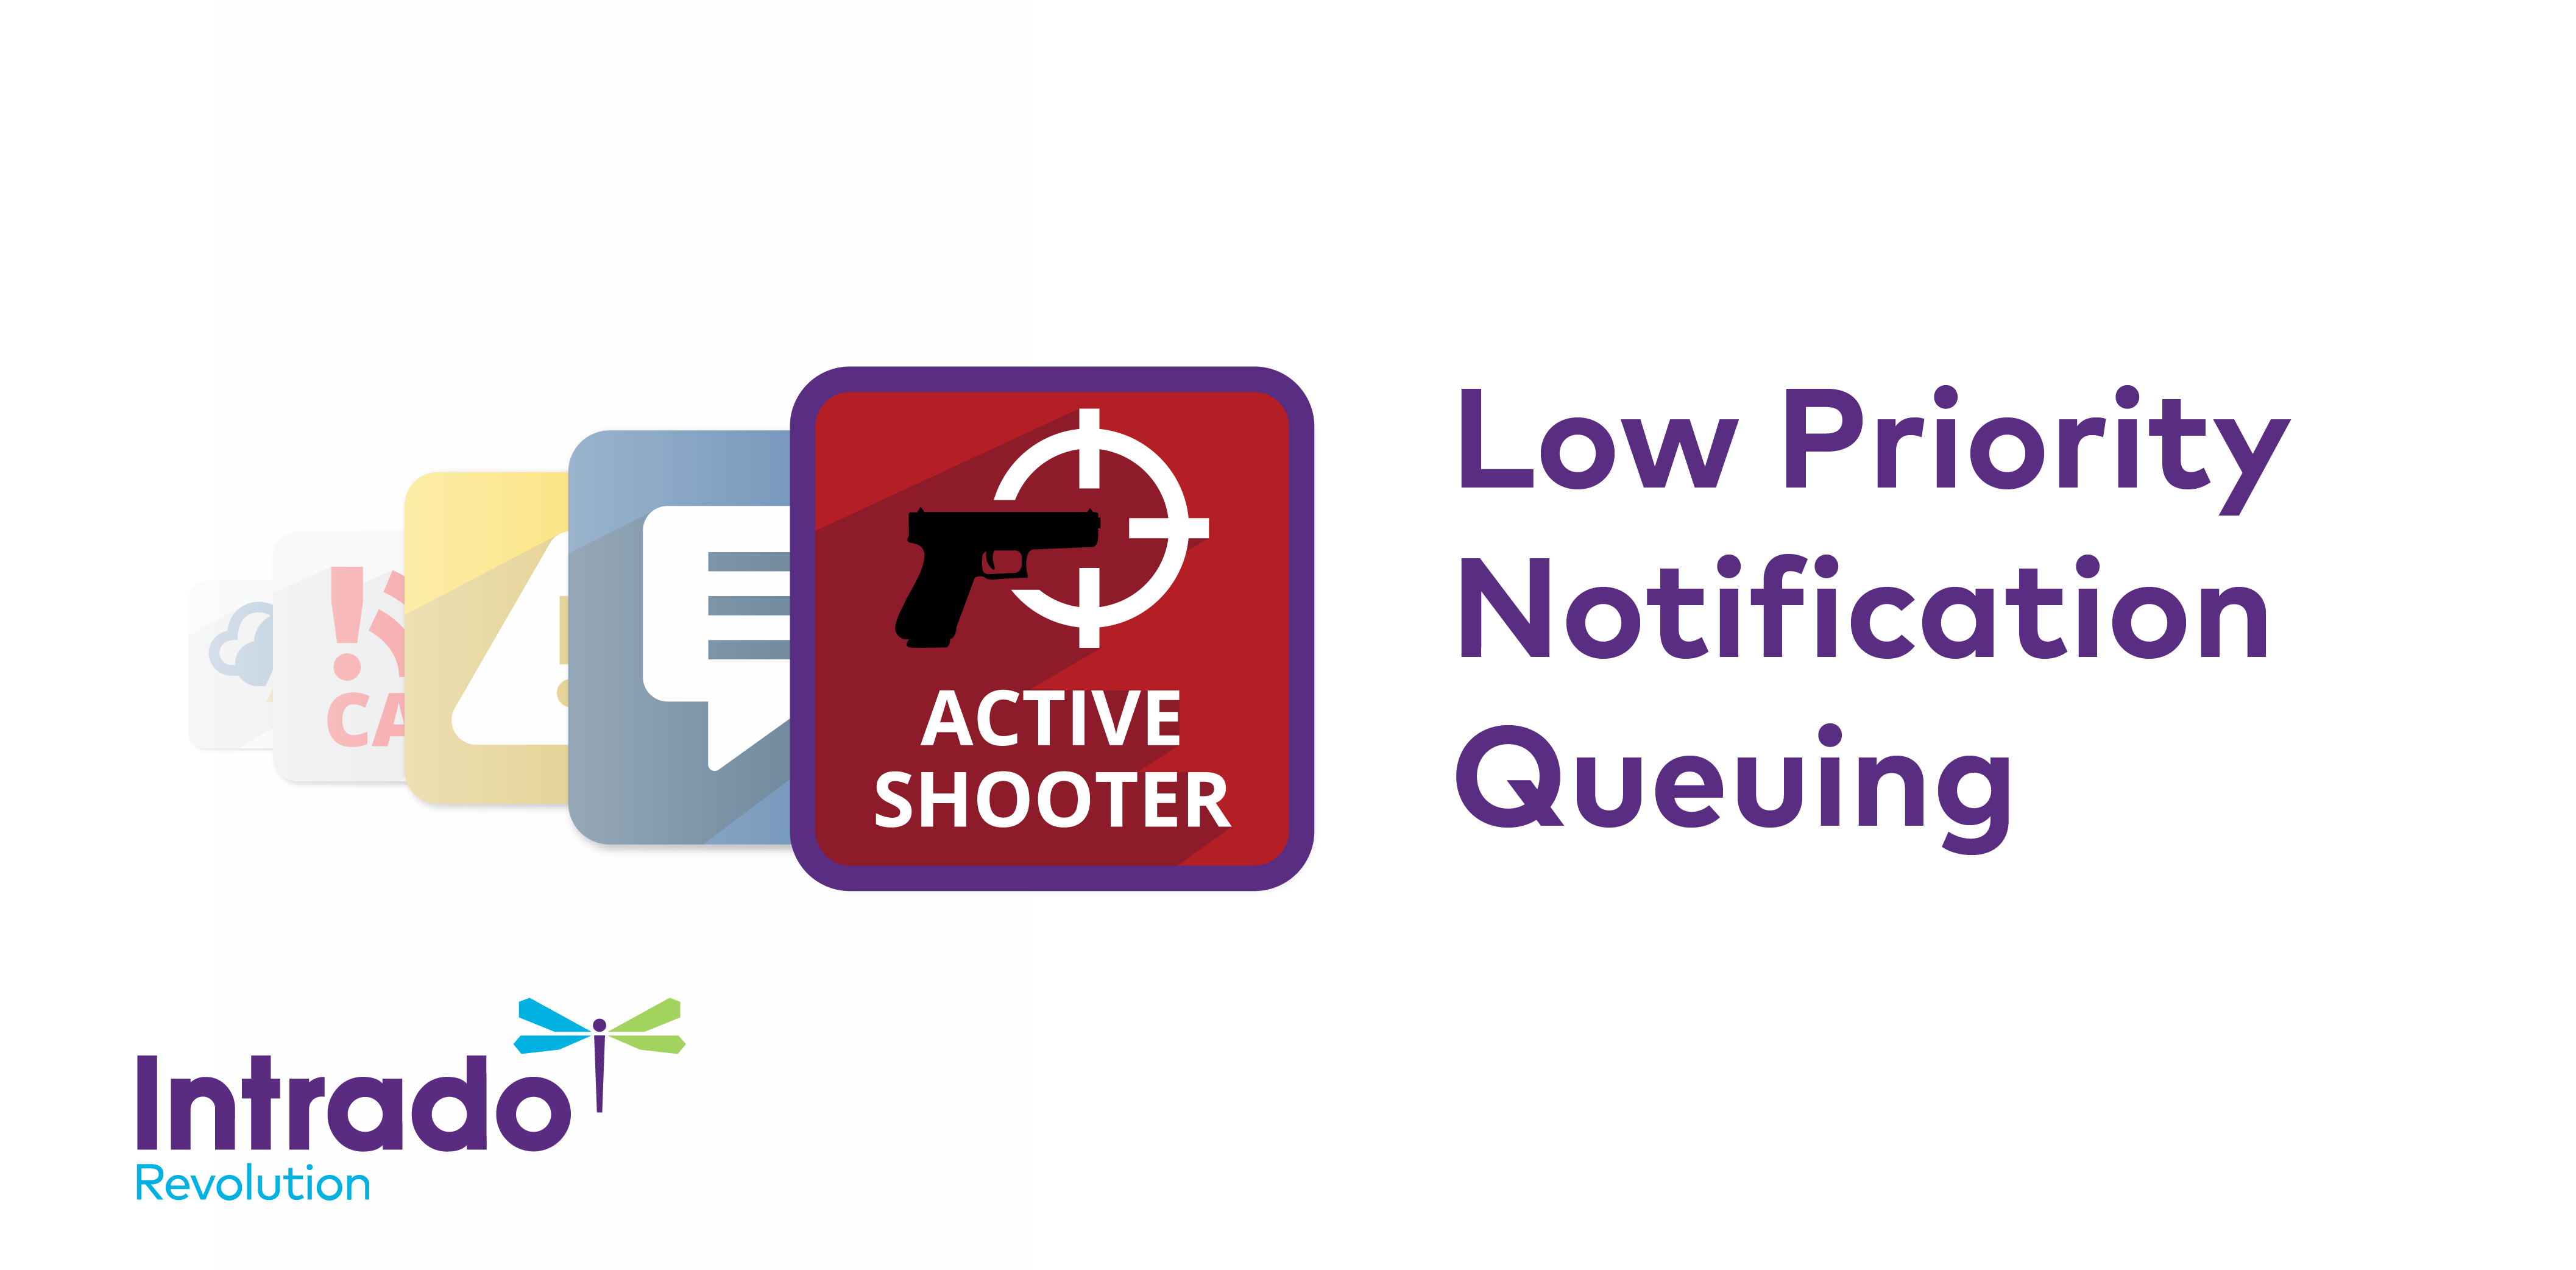 Low priority notification queuing